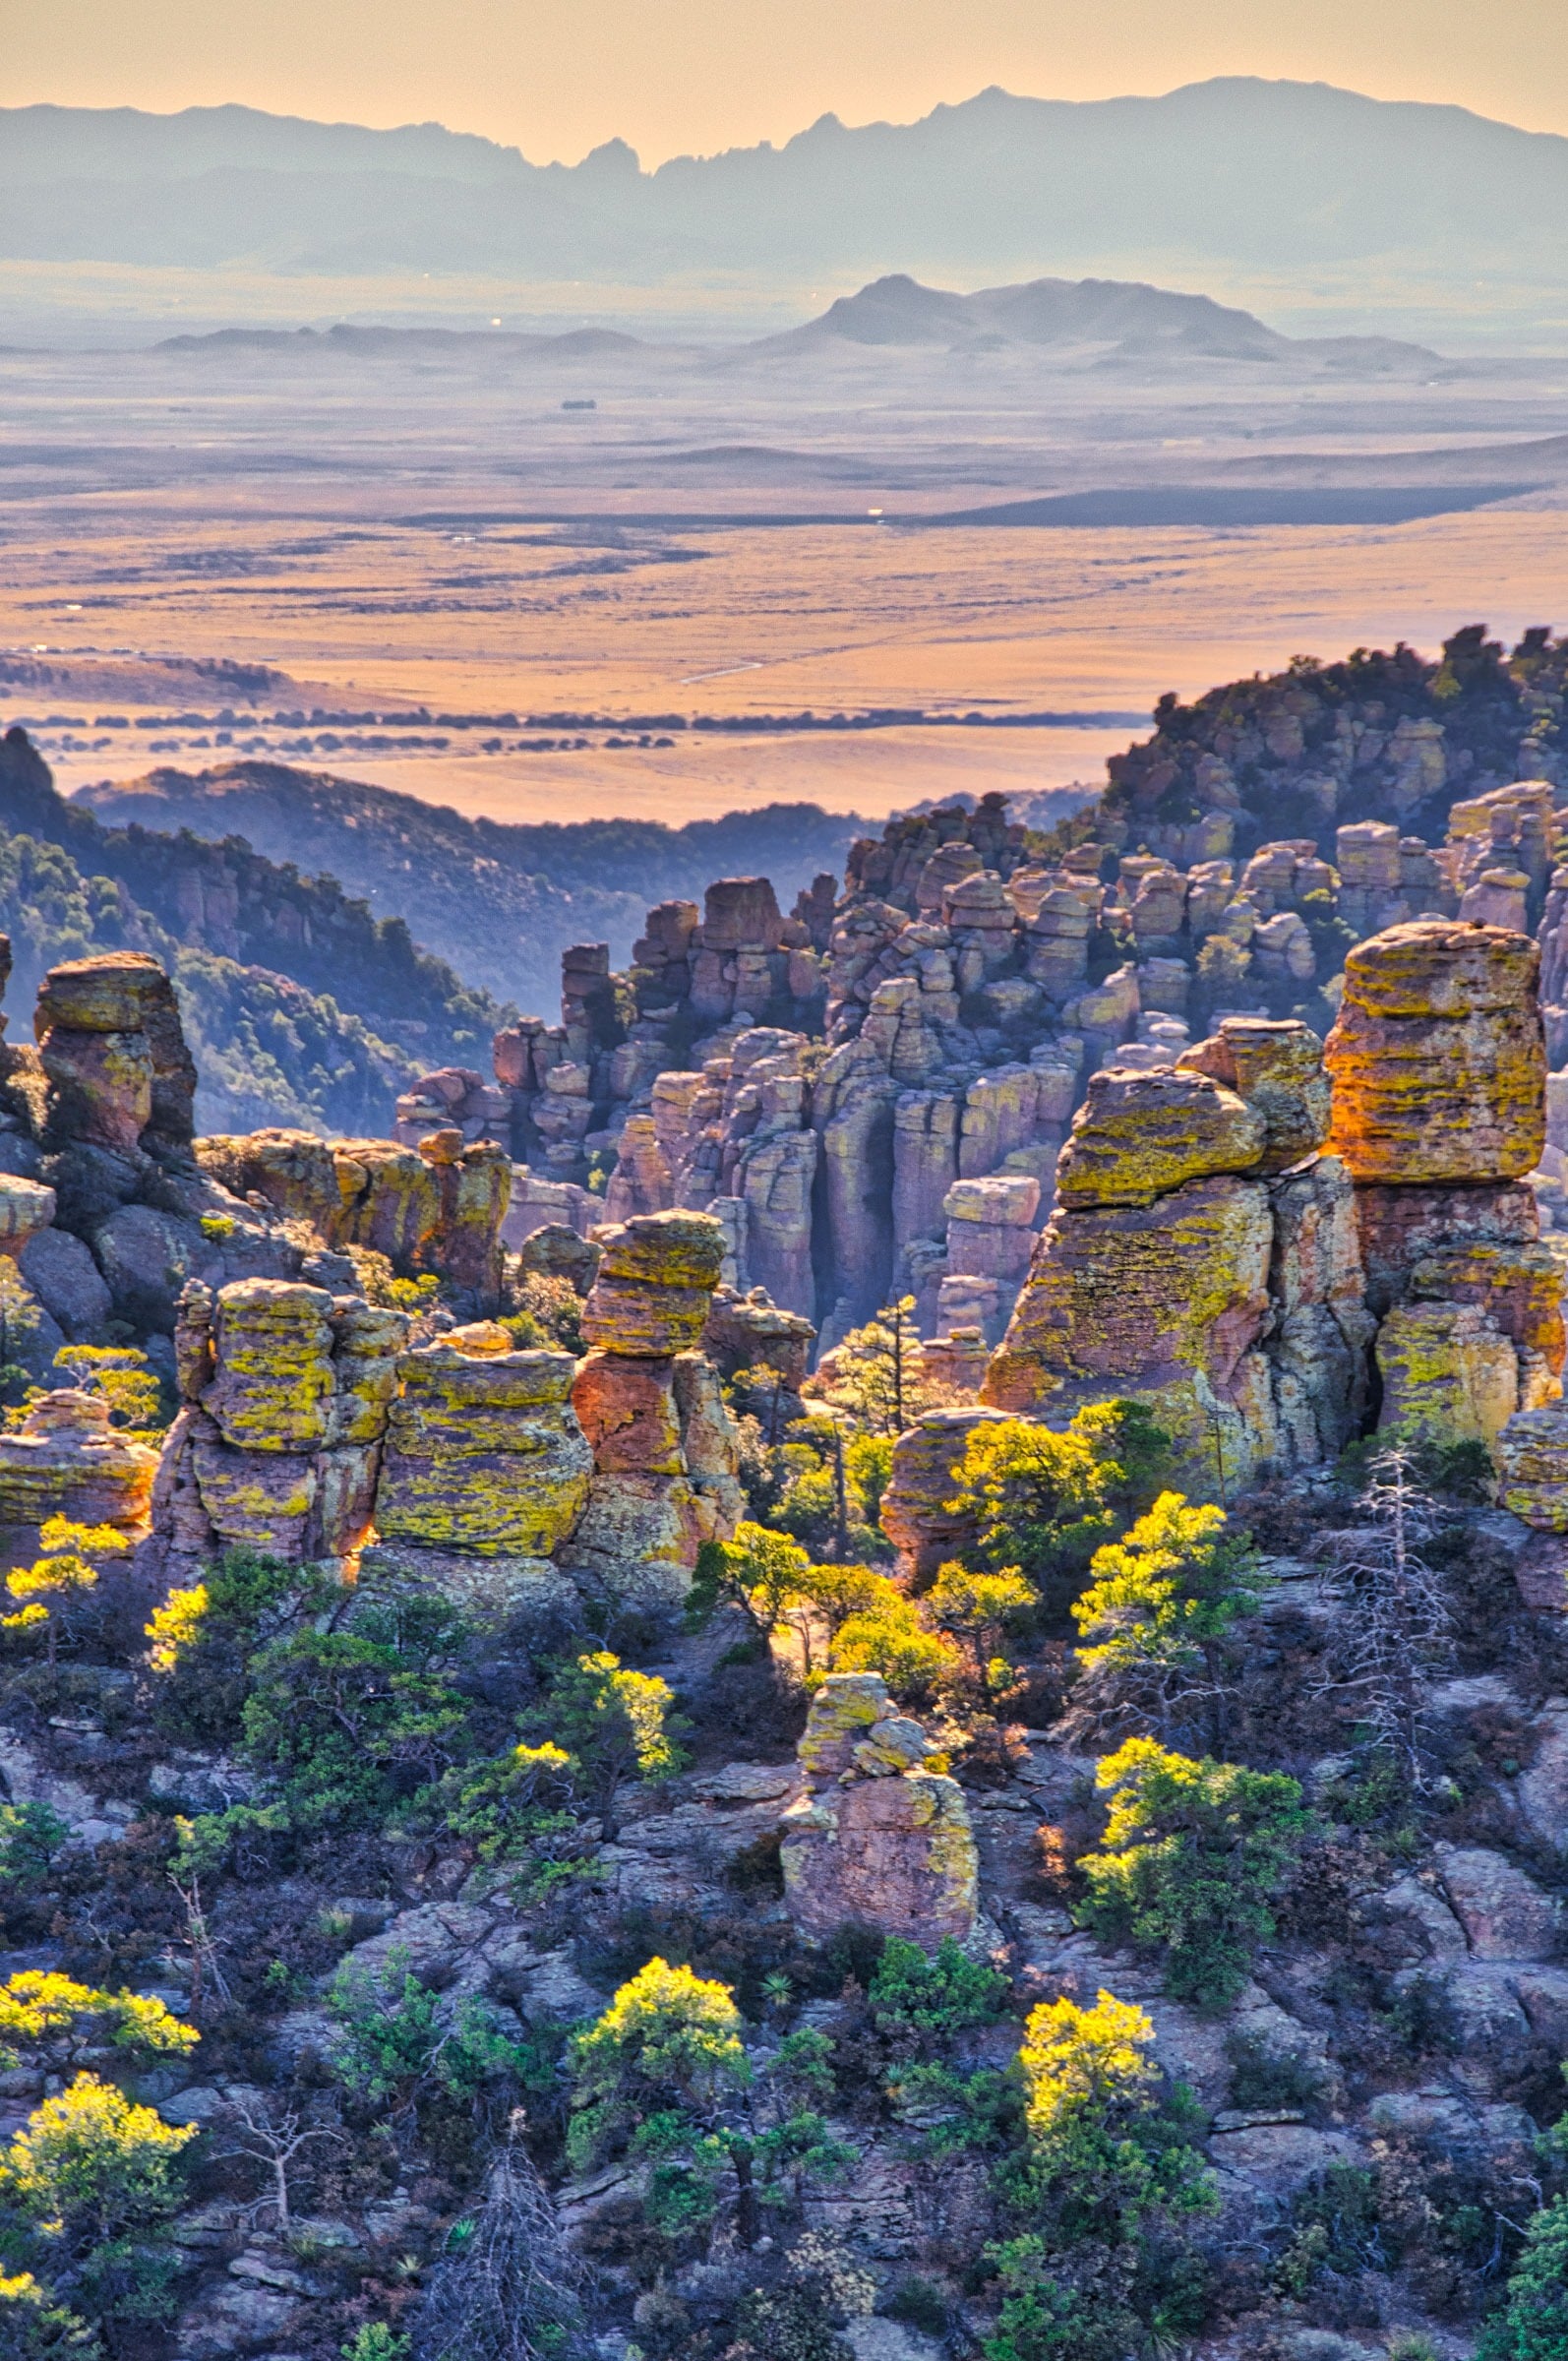 Sunset light illuminates the sides of rhyolite pinnacles, as well as the vallies beyon, in Chiricahua National Monument in Arizona.